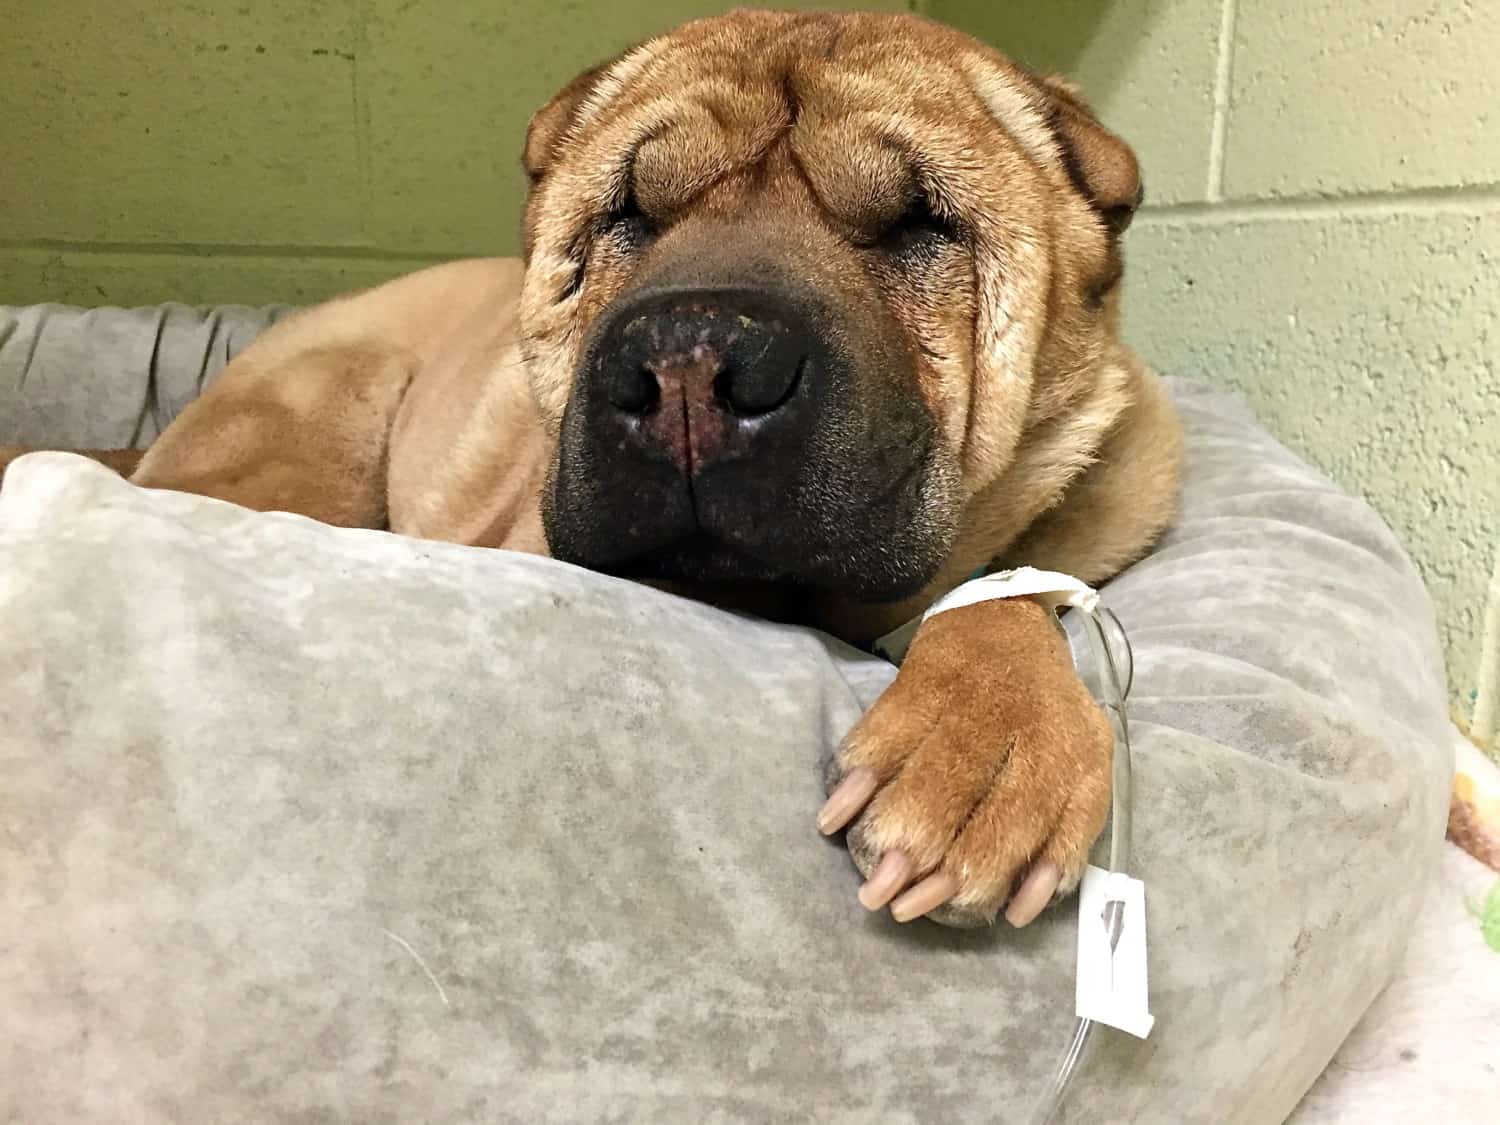 Ty the Shar-pei from GoPetFriendly.com laying on a bed in the veterinary hospital with an IV in his paw